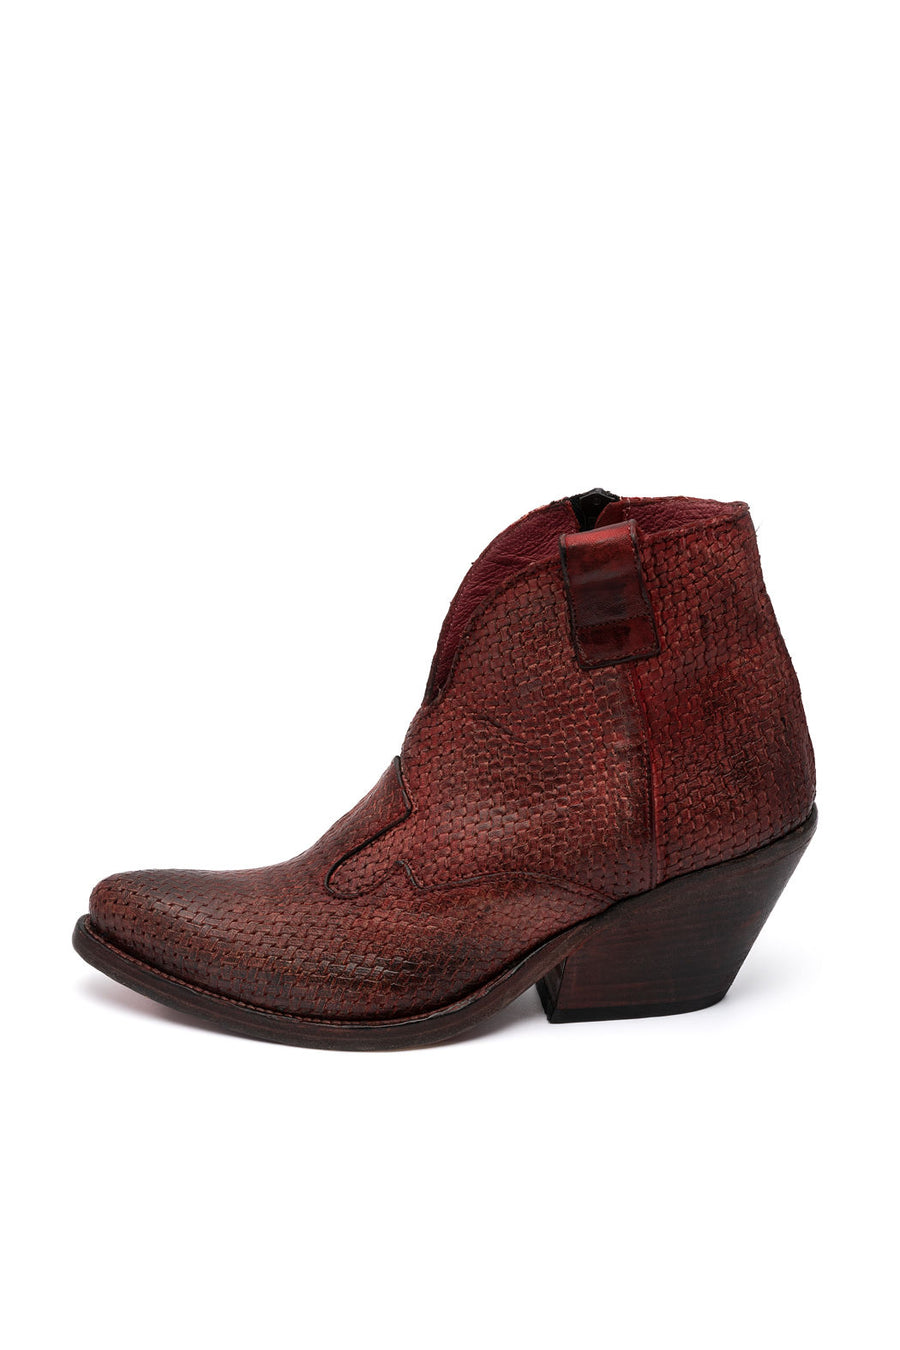 RYDER Keep Red Ankle Cowboy Boots